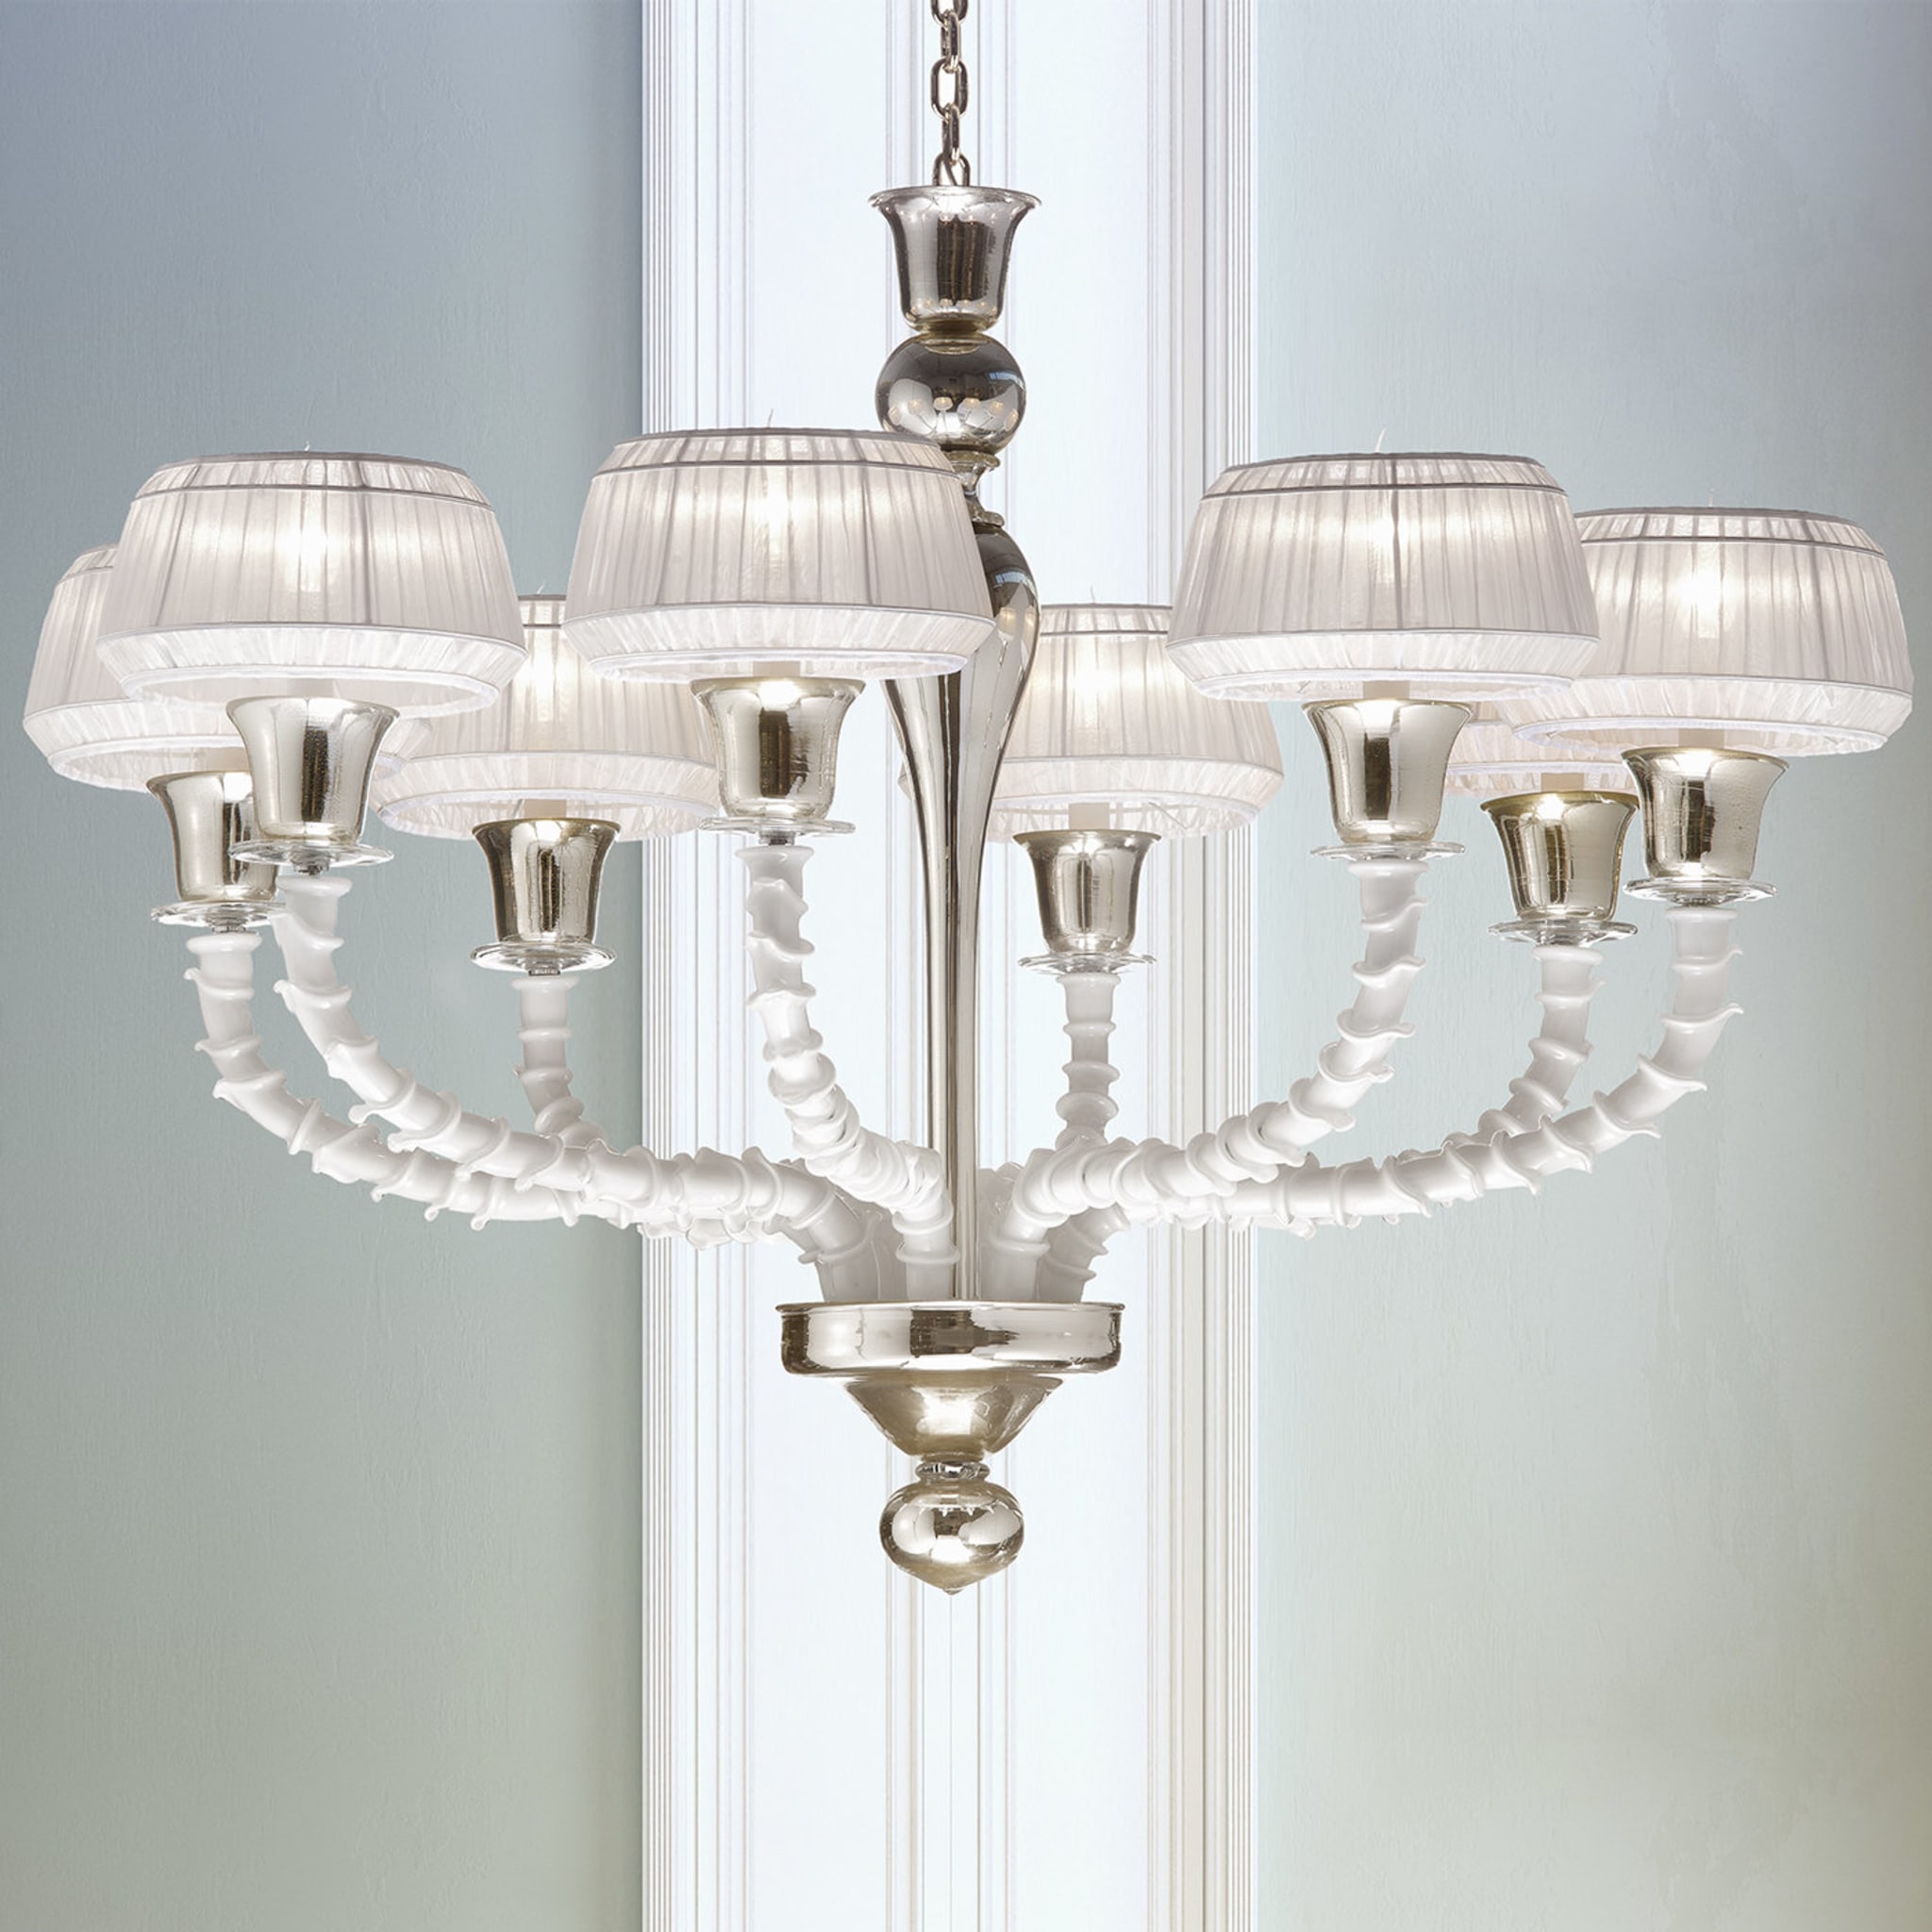 White and Silver Venetian Glass Chandelier - Alternative view 1